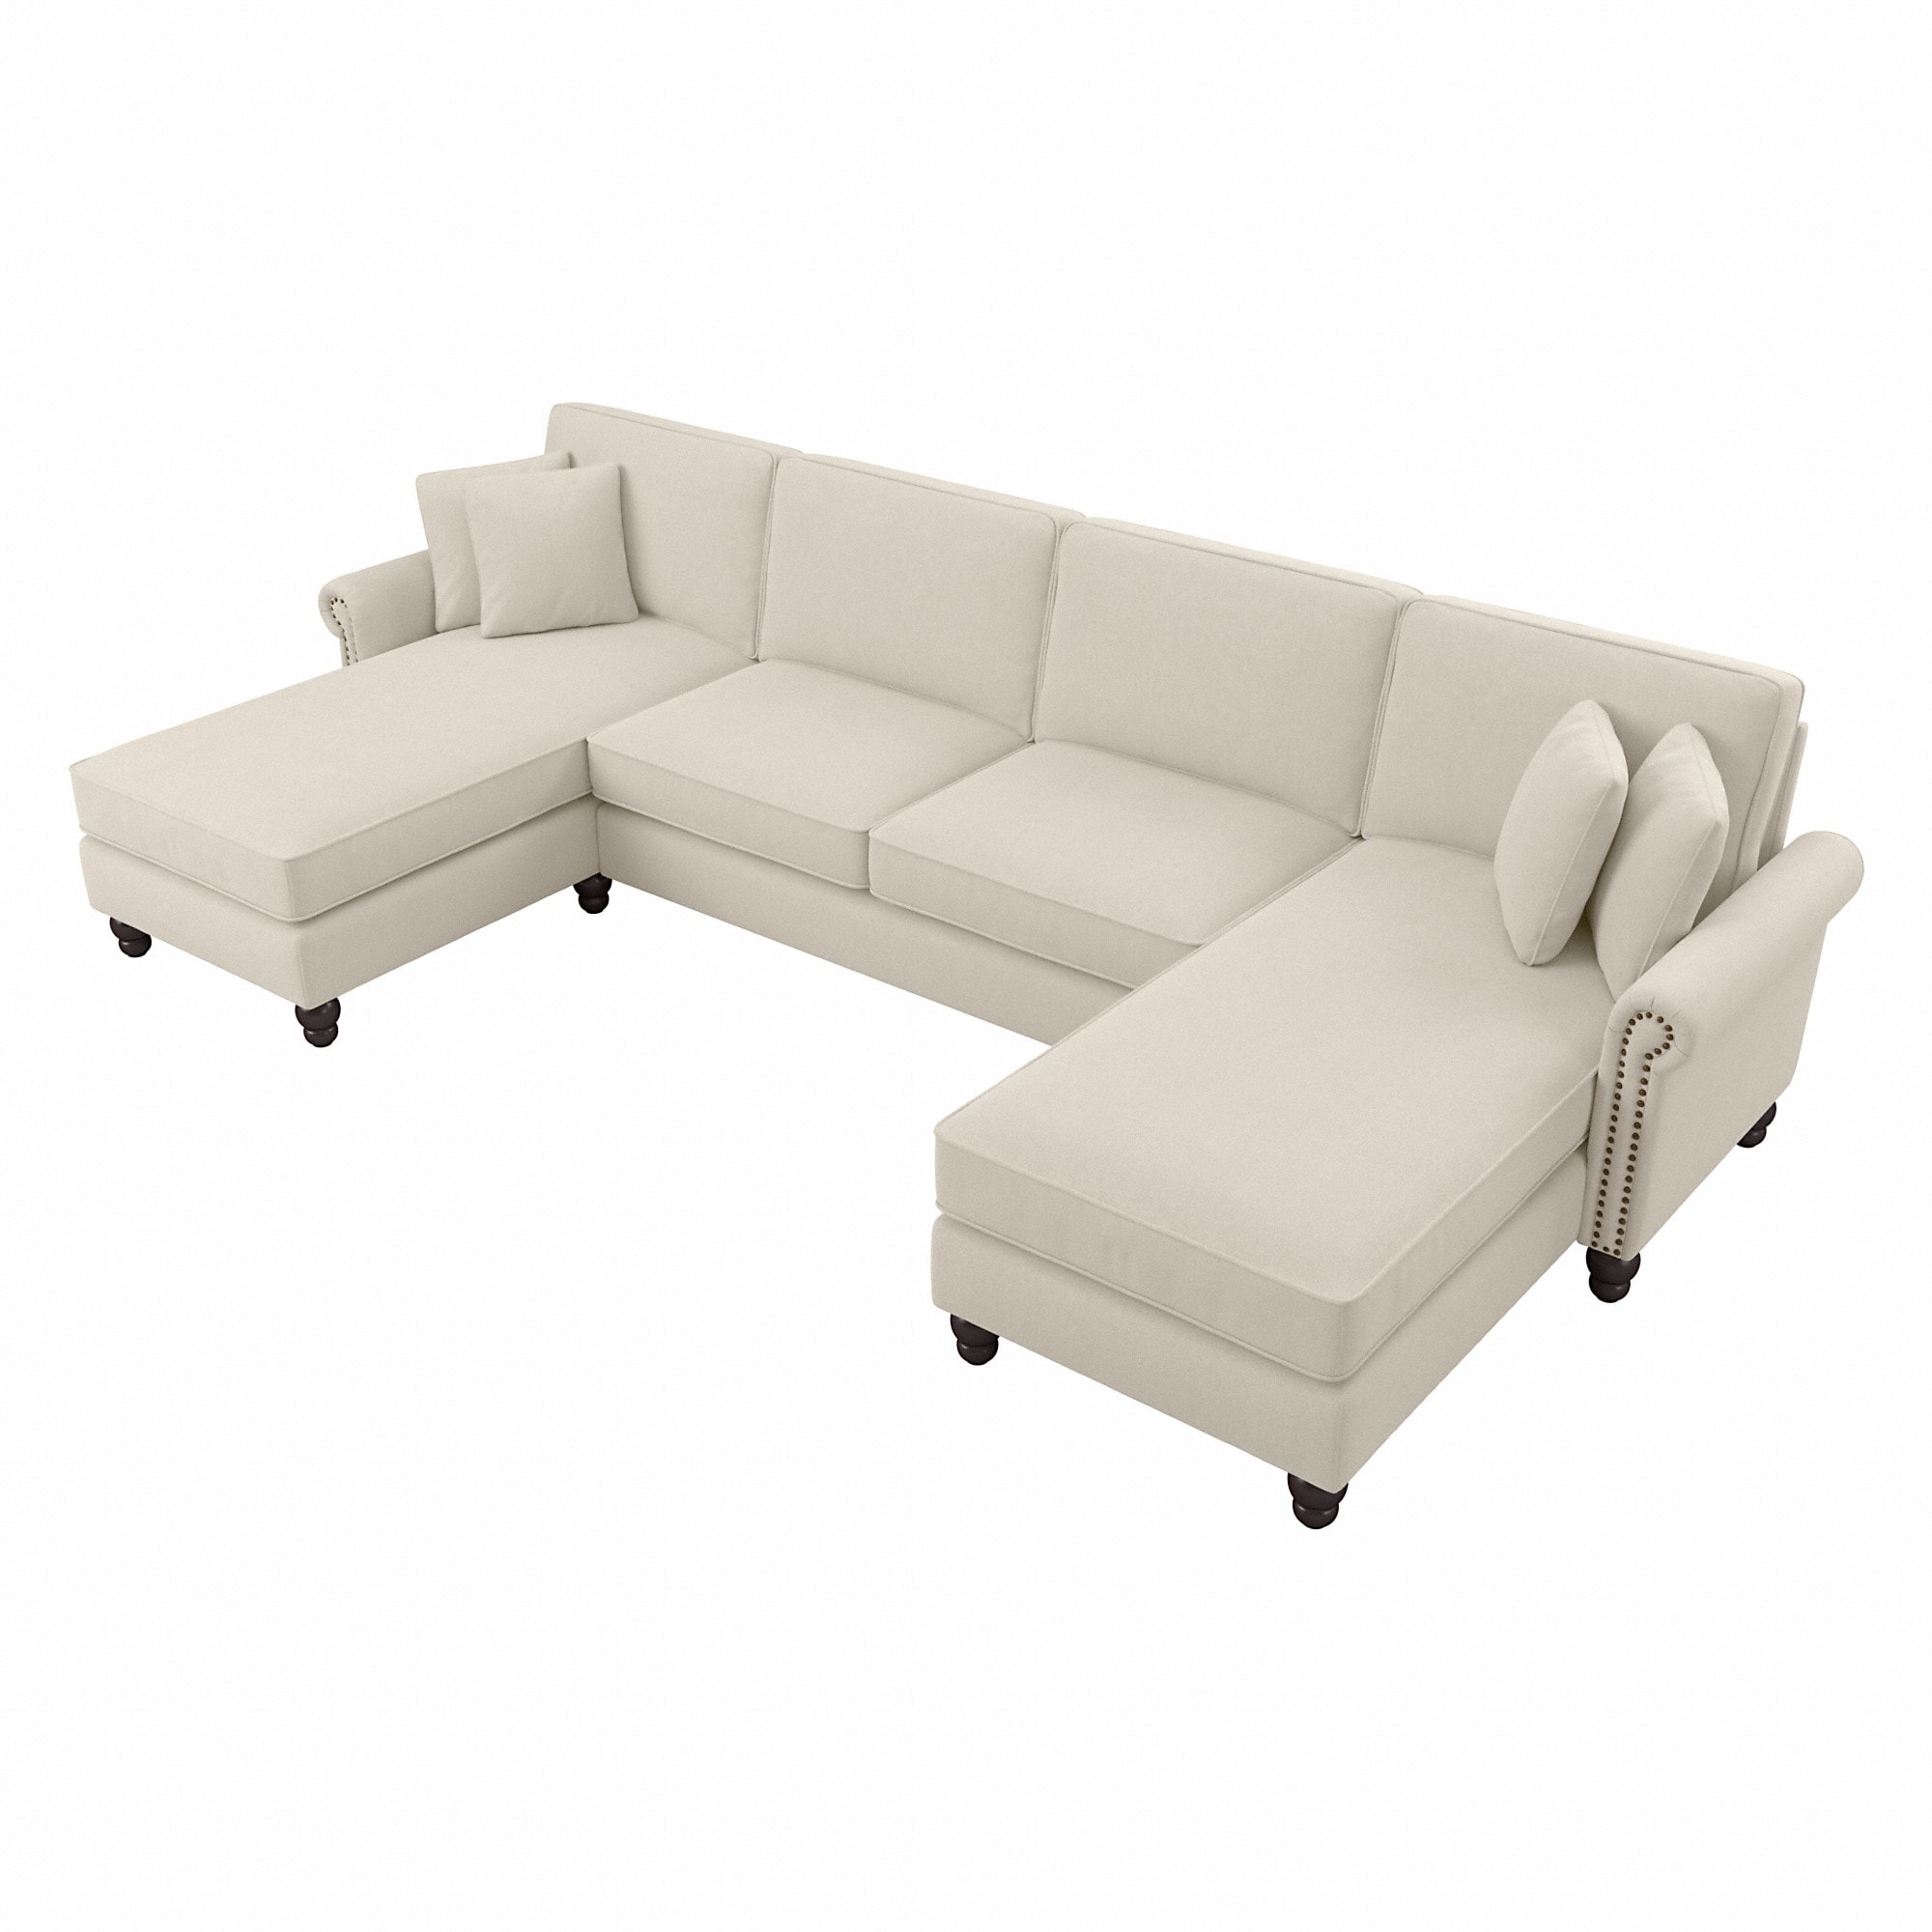 Bush Furniture Coventry Sectional Couch with Double Chaise Lounge by